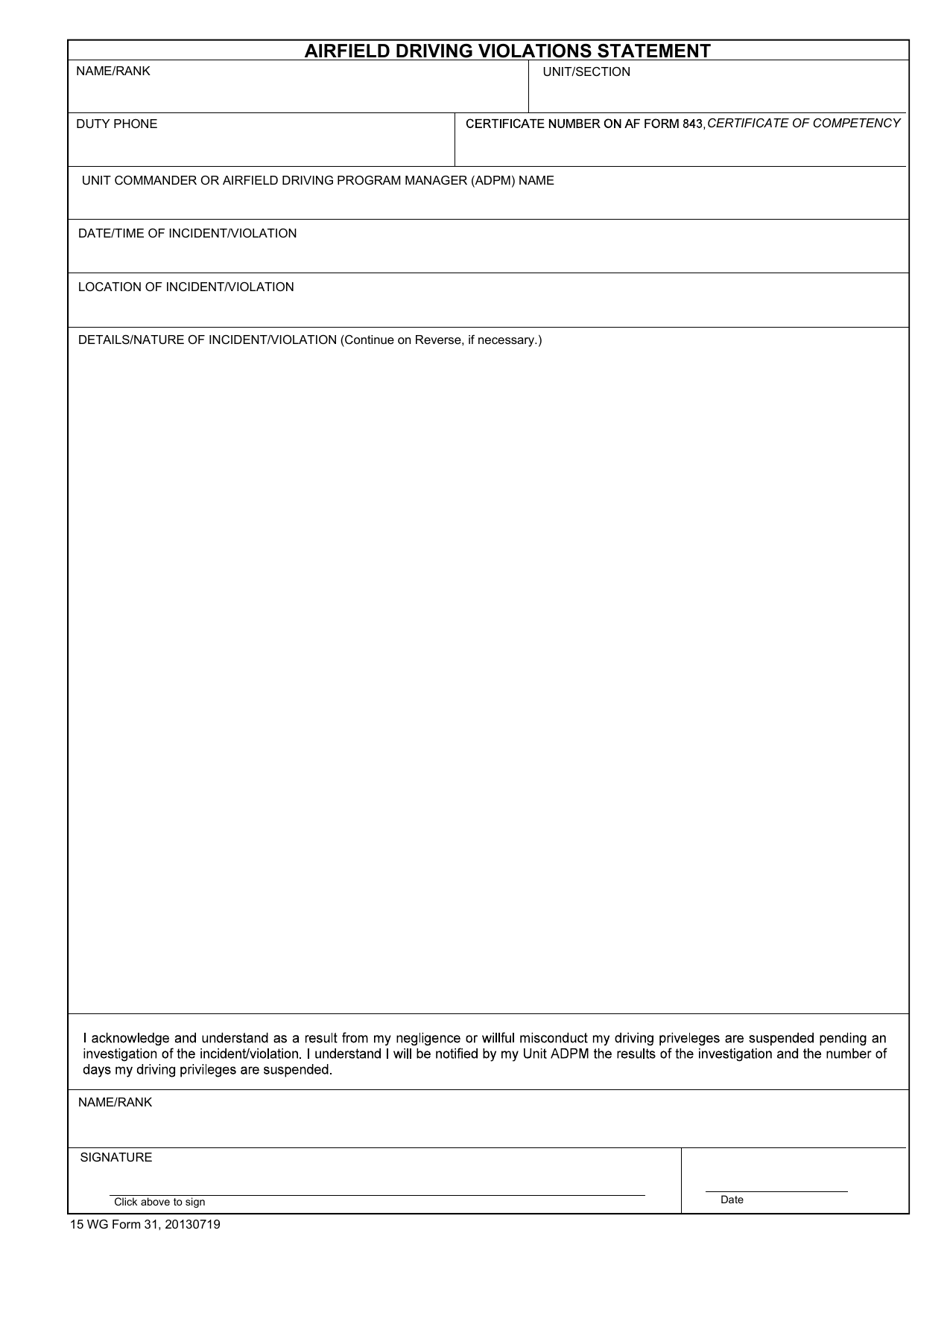 15 WG Form 31 Airfield Driving Violations Statement, Page 1